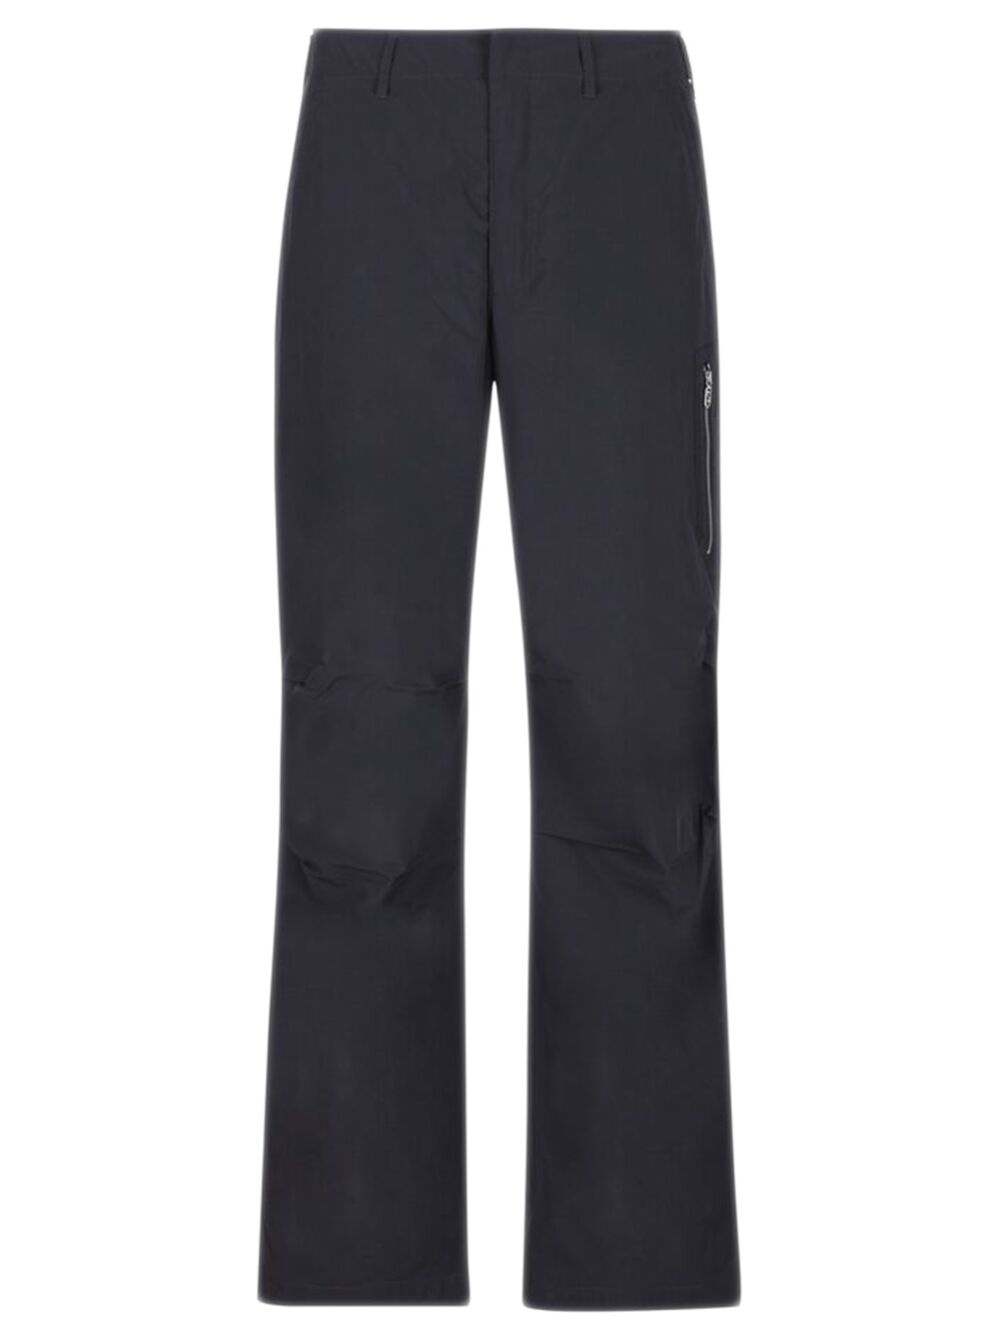 Micro ripstop trousers - 1